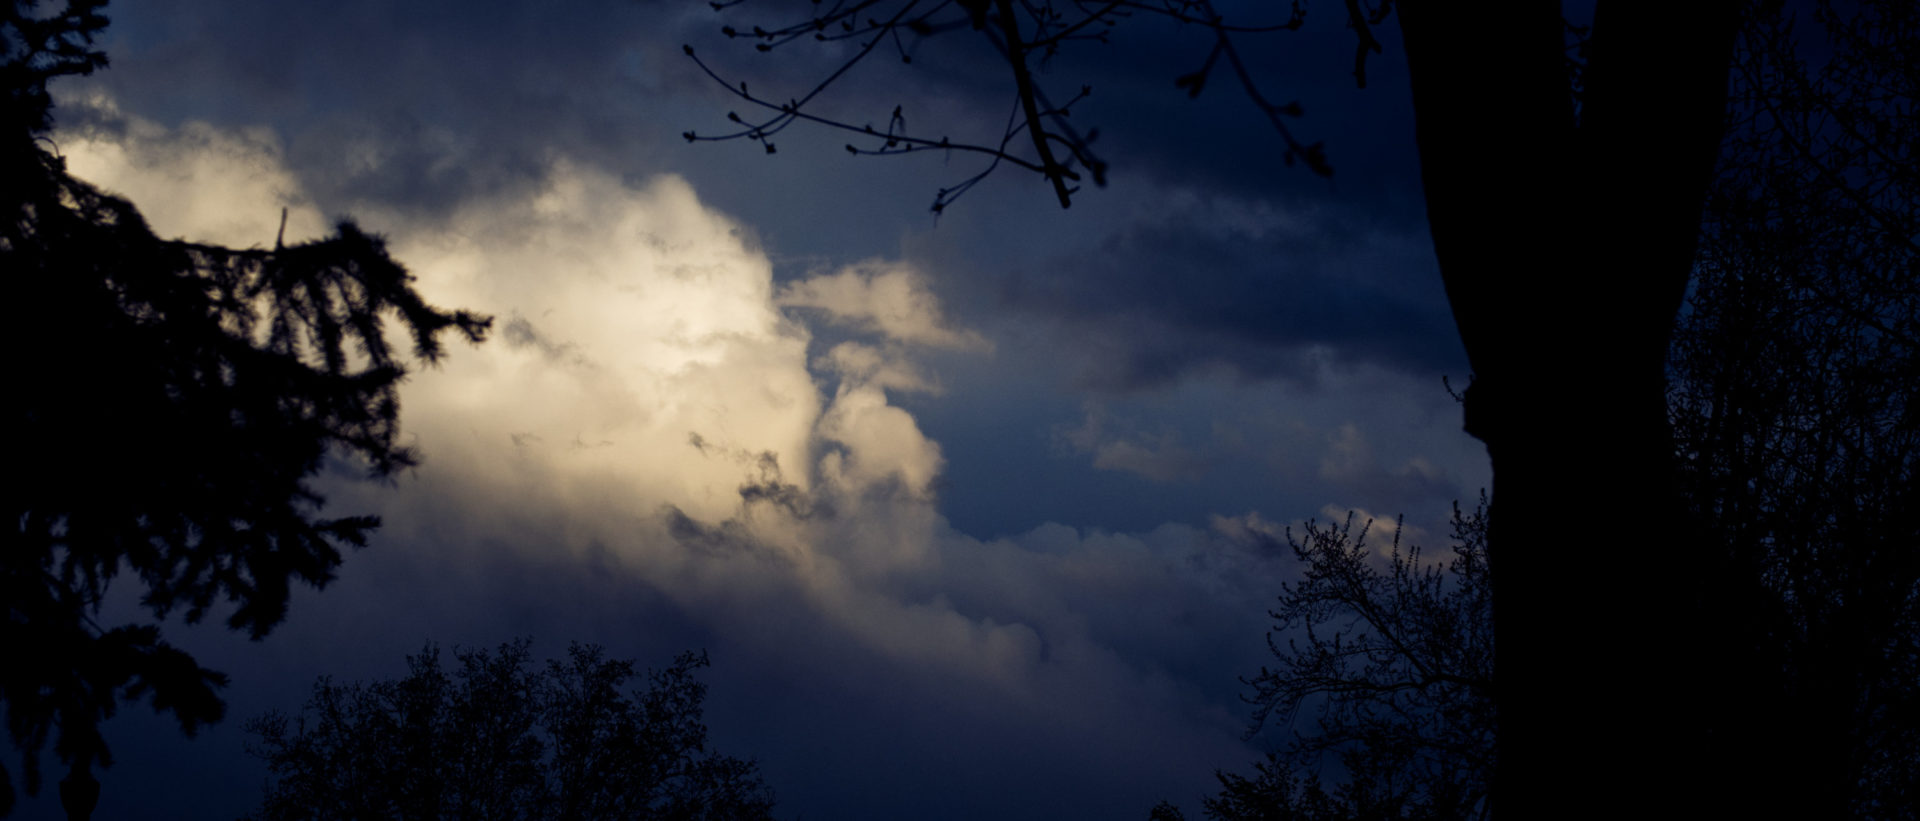 Highlighted clouds while looking through darkened trees